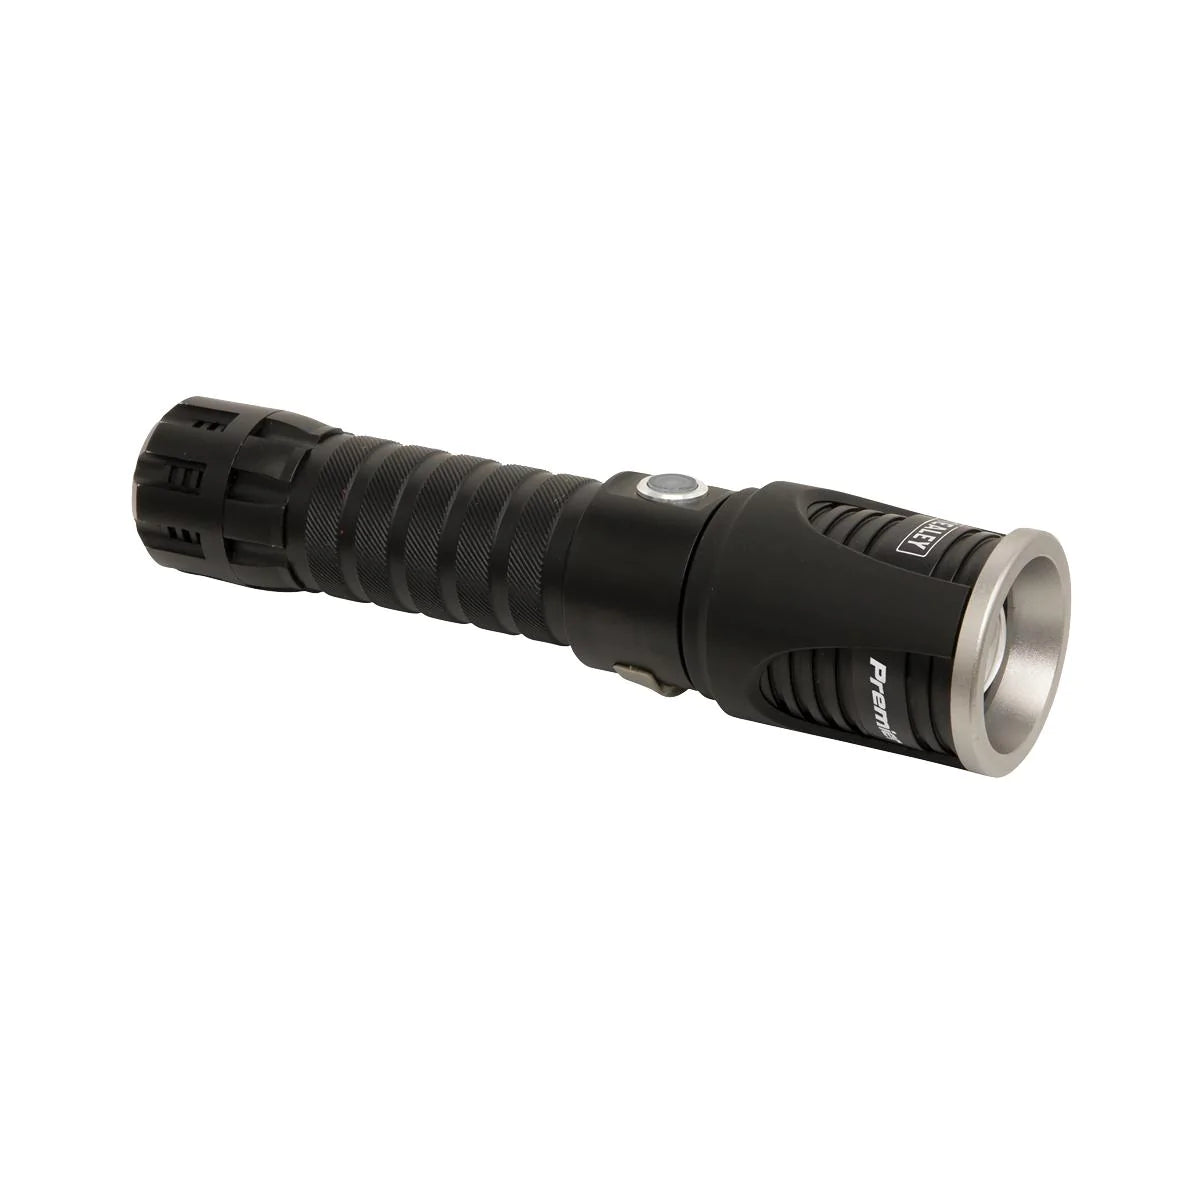 Aluminium Torch 5W CREE* XPG LED Adjustable Focus Rechargeable with USB Port